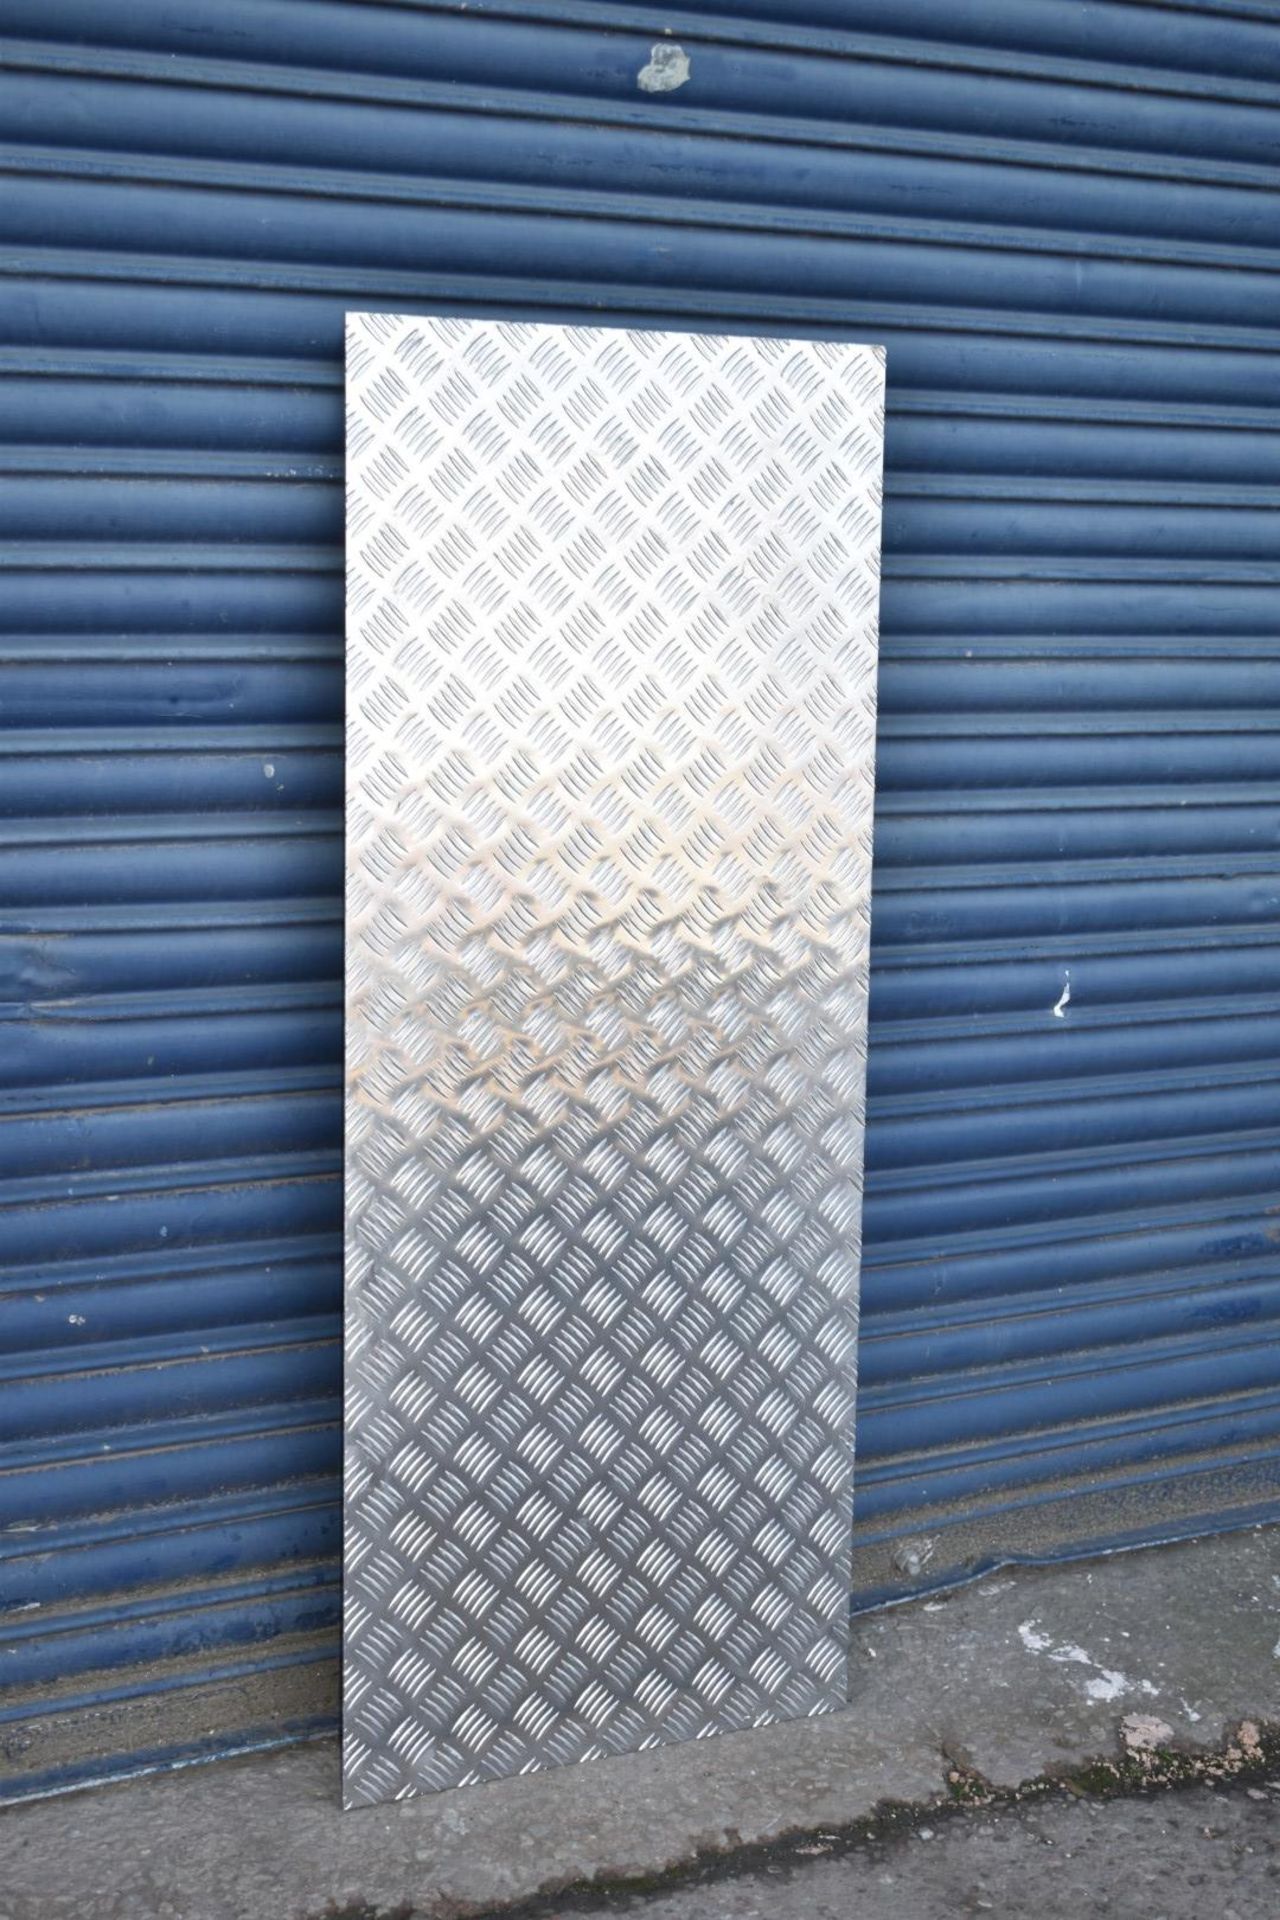 1 x Aluminium Tread Checker Plate - Size 125 x 50.5 x 0.3 cms - None Slip Floor Plate Suitable For - Image 3 of 11